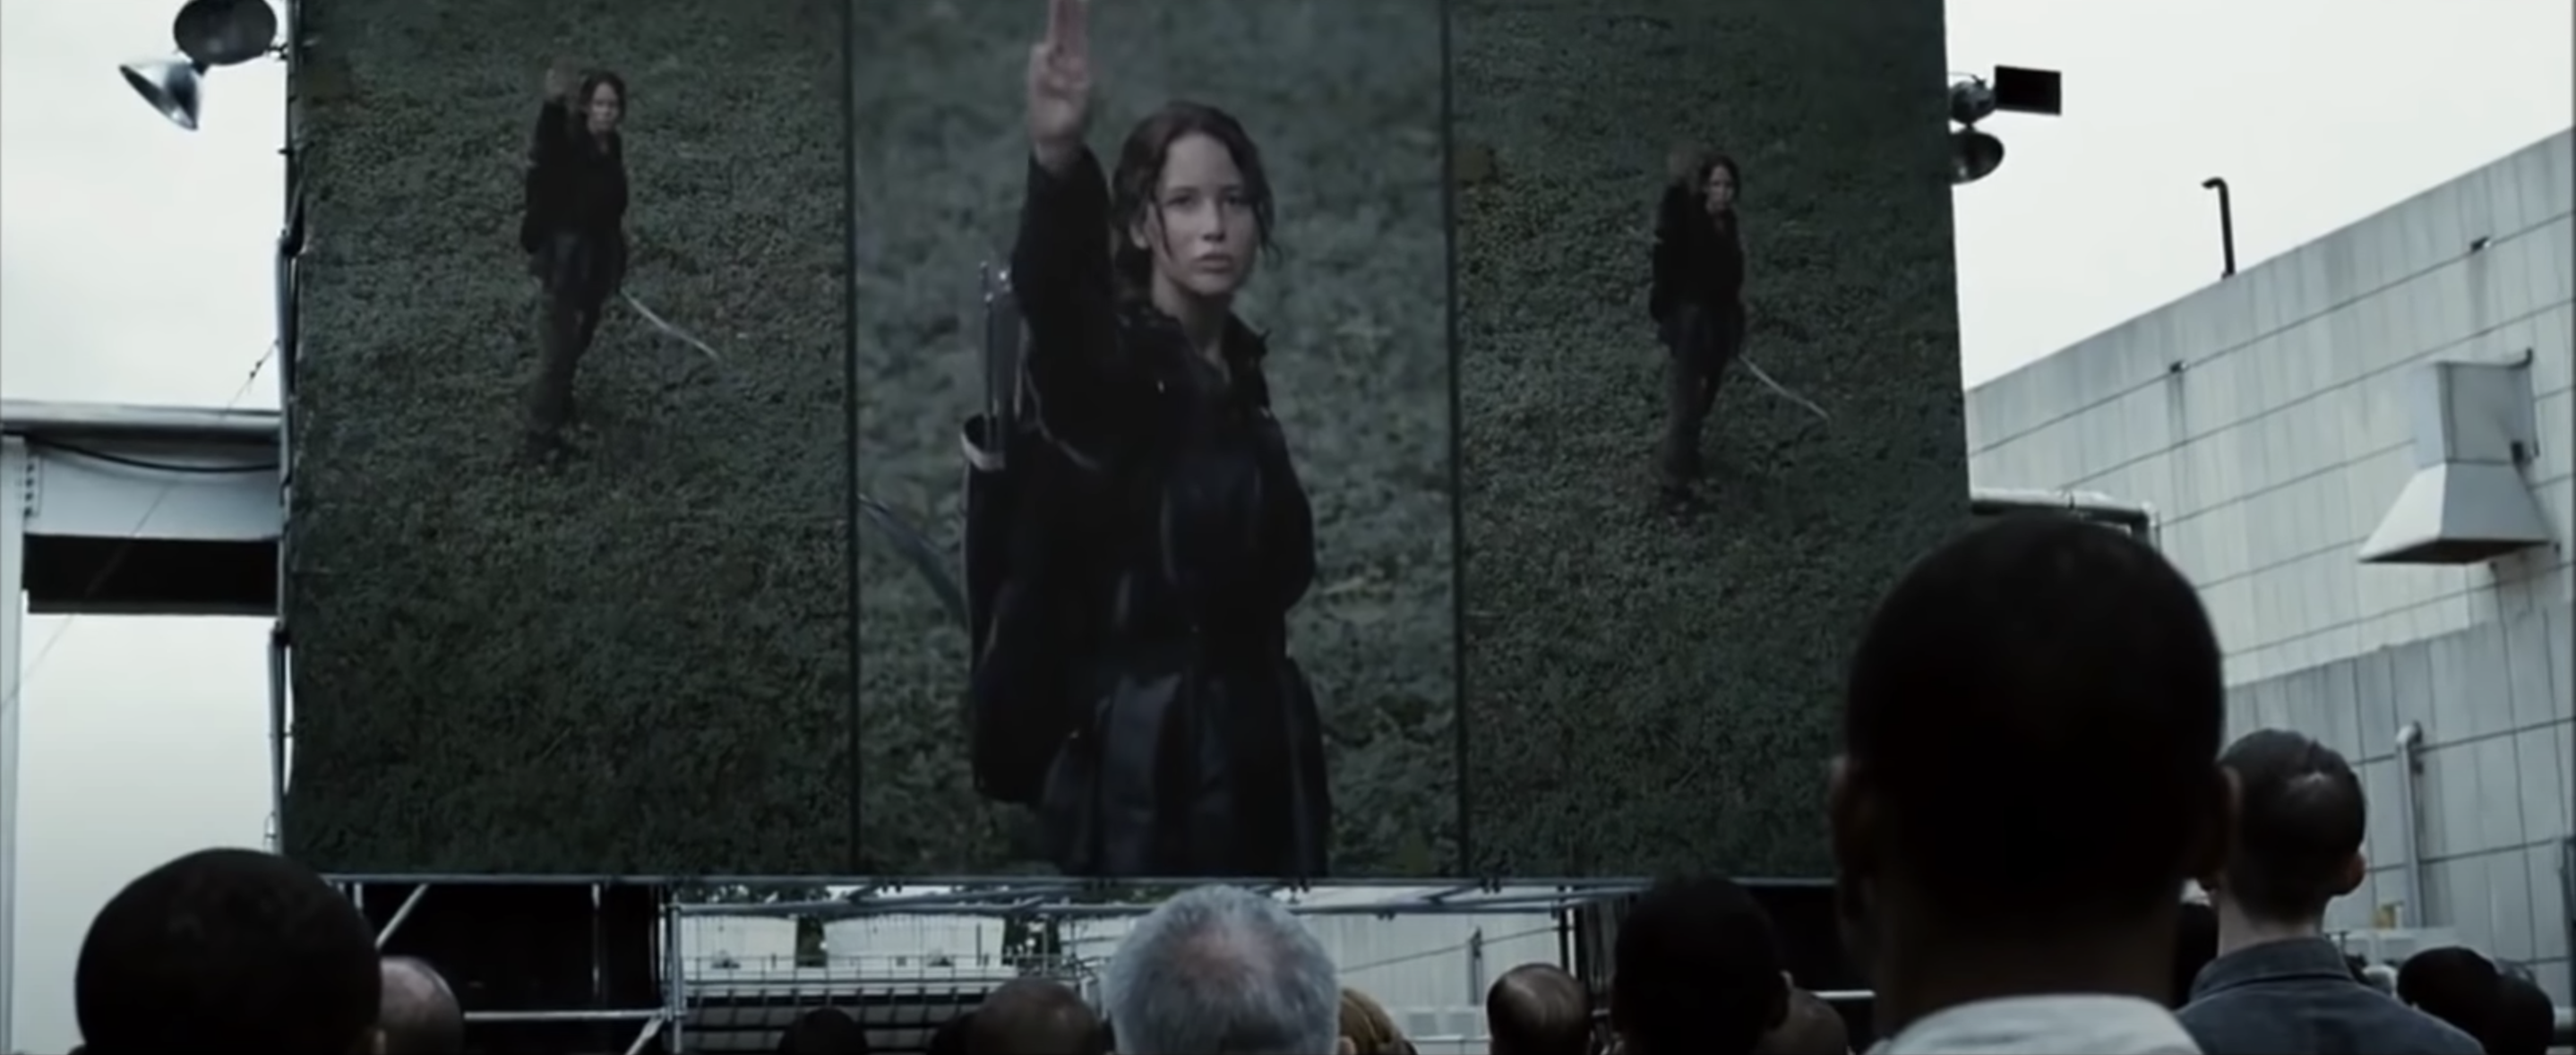 Katniss gives the Three Finger Salute